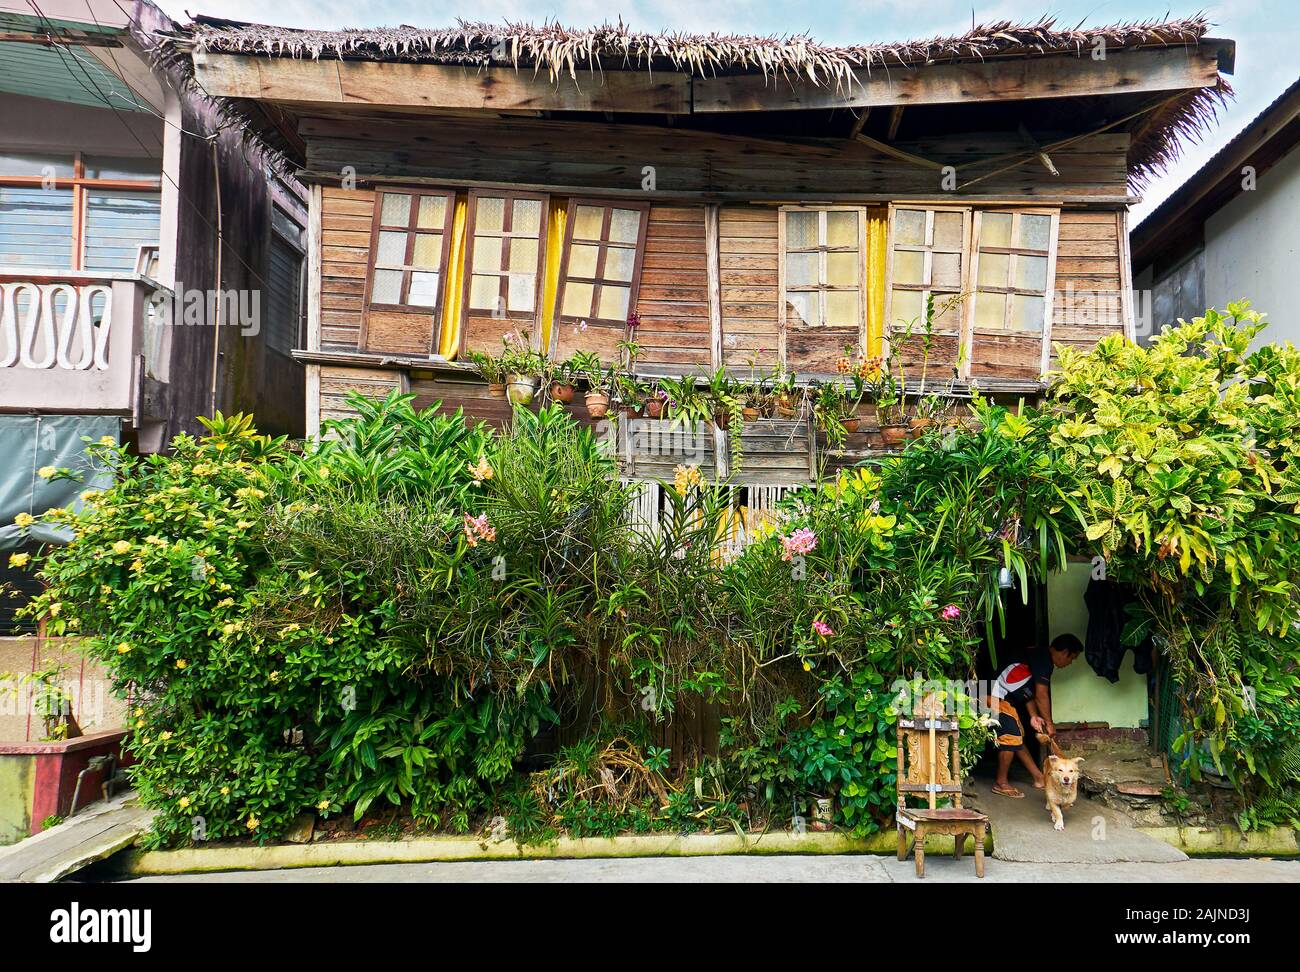 Romblon Town, Philippines: Old, broken traditional wooden building surrounded by plenty of plants and flowers in front Stock Photo